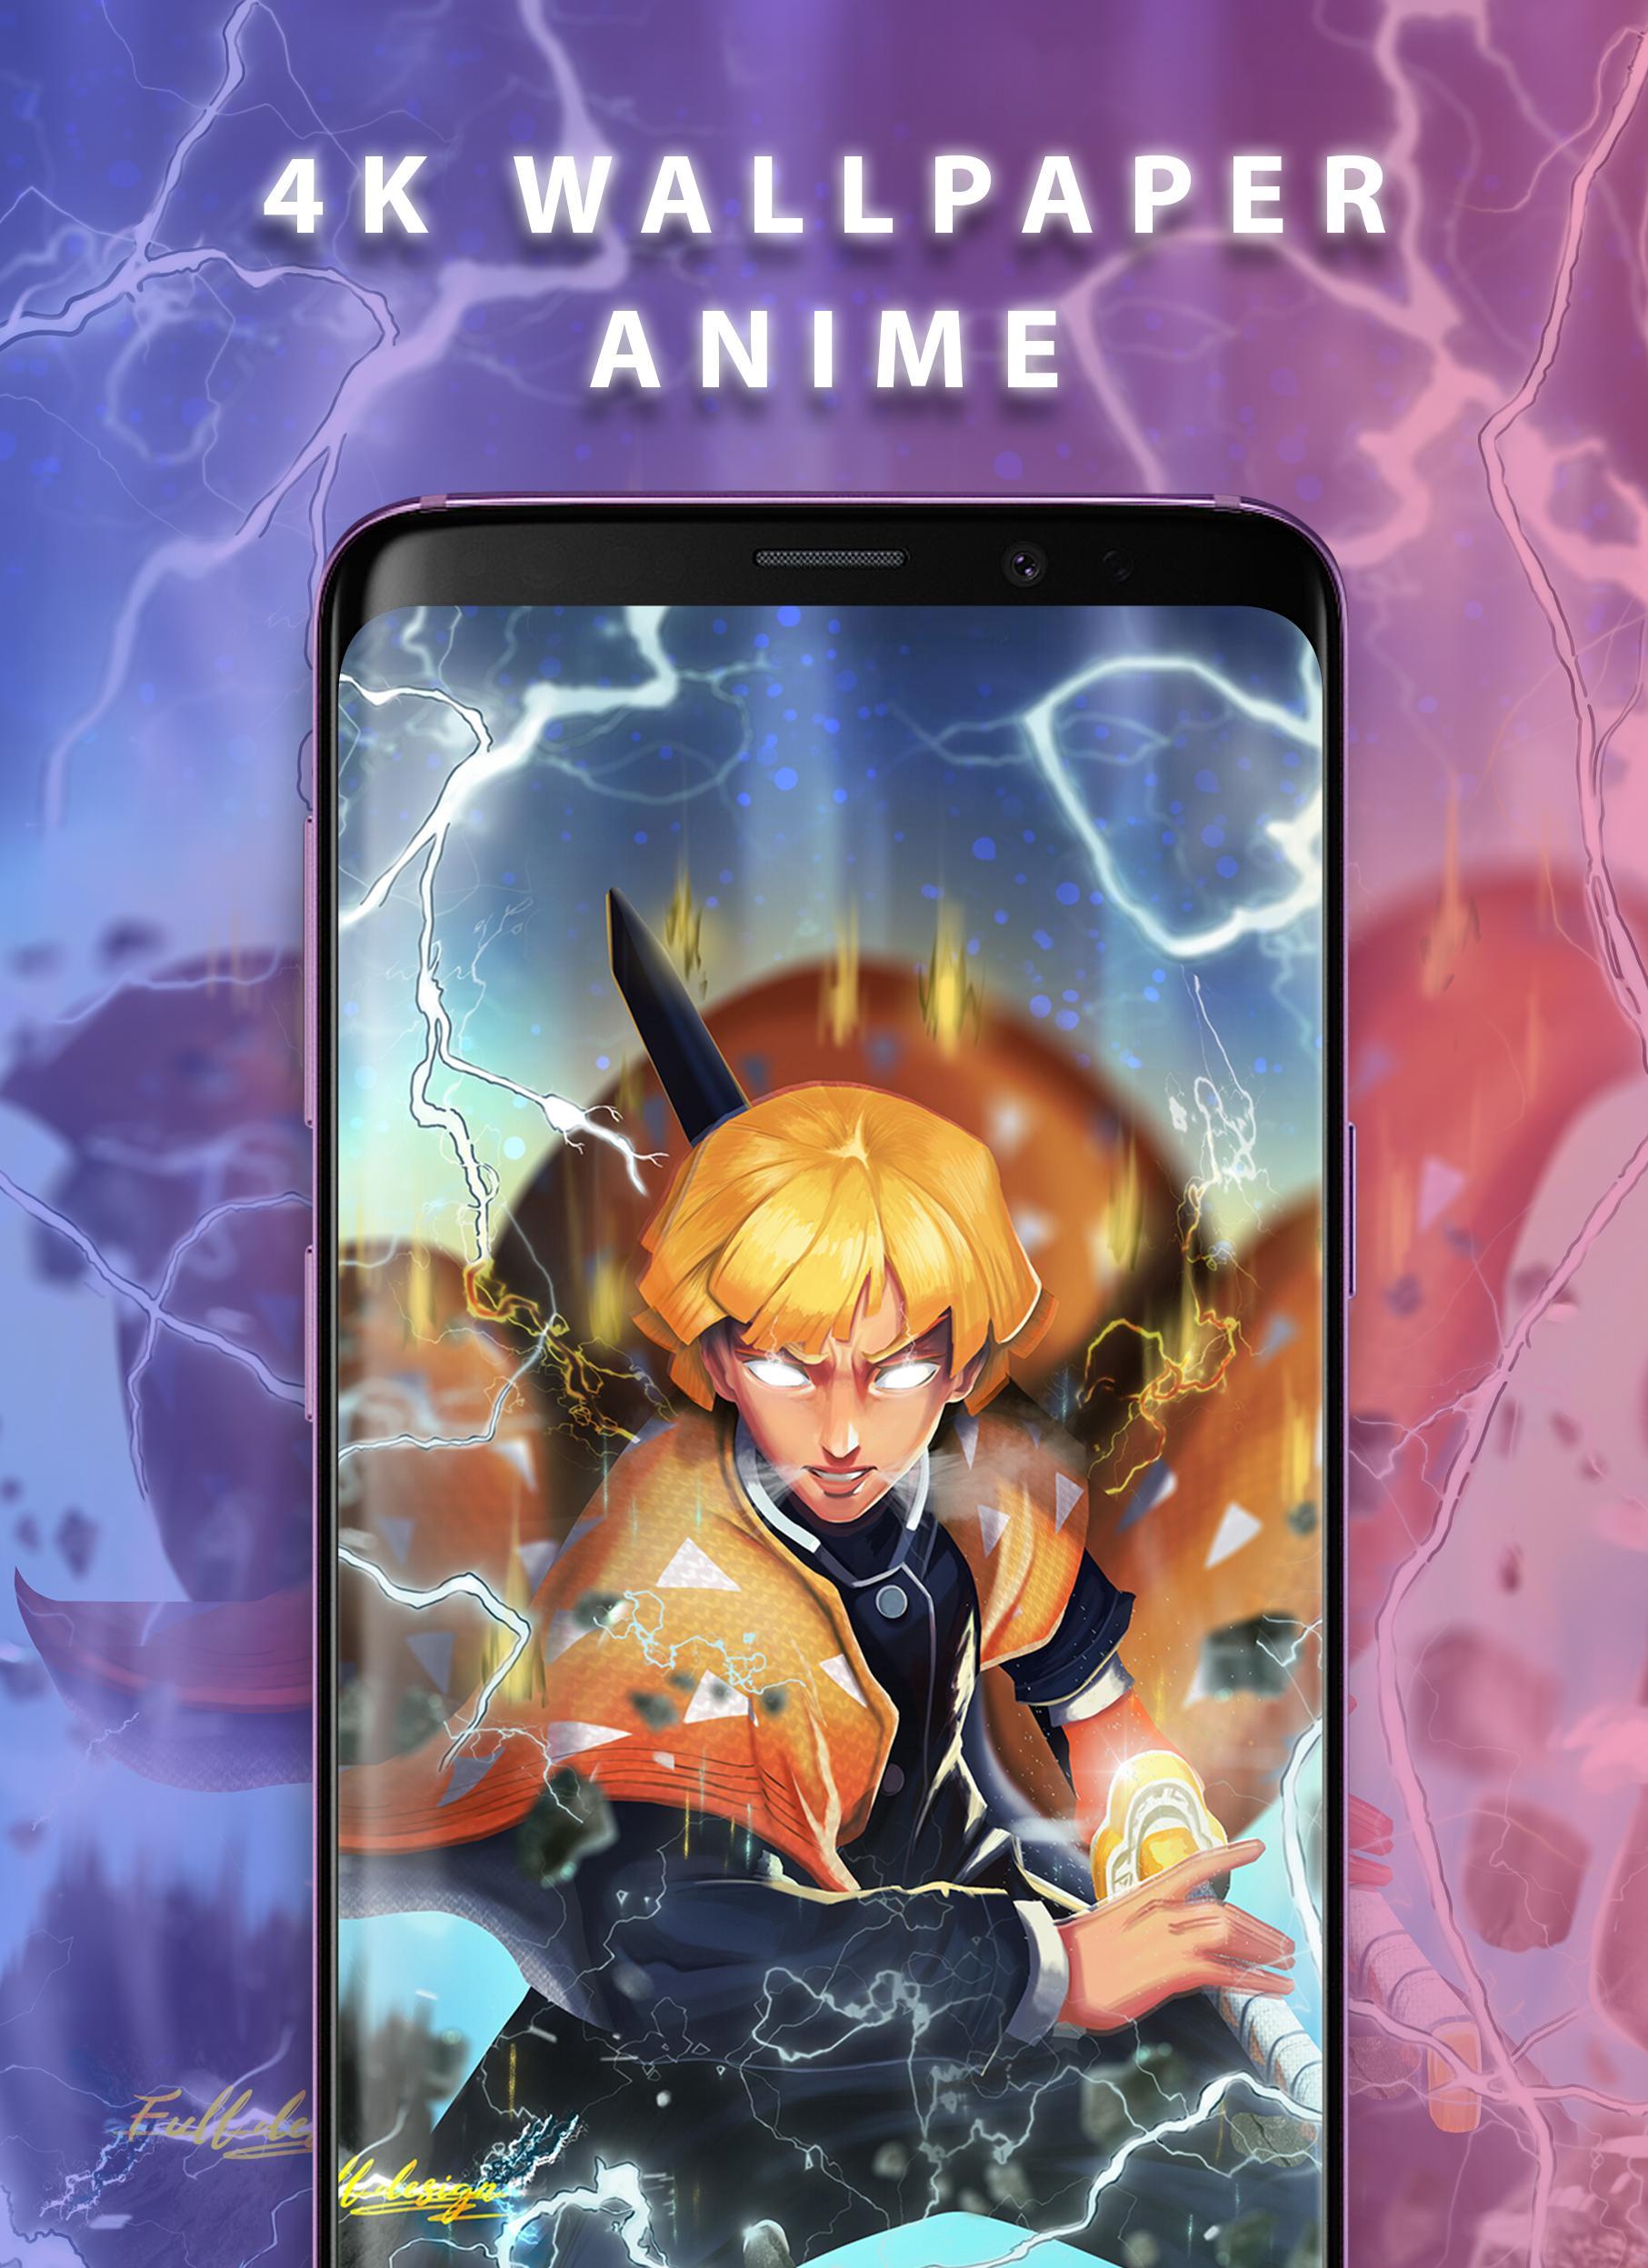 4k Wallpaper Anime For Android Apk Download